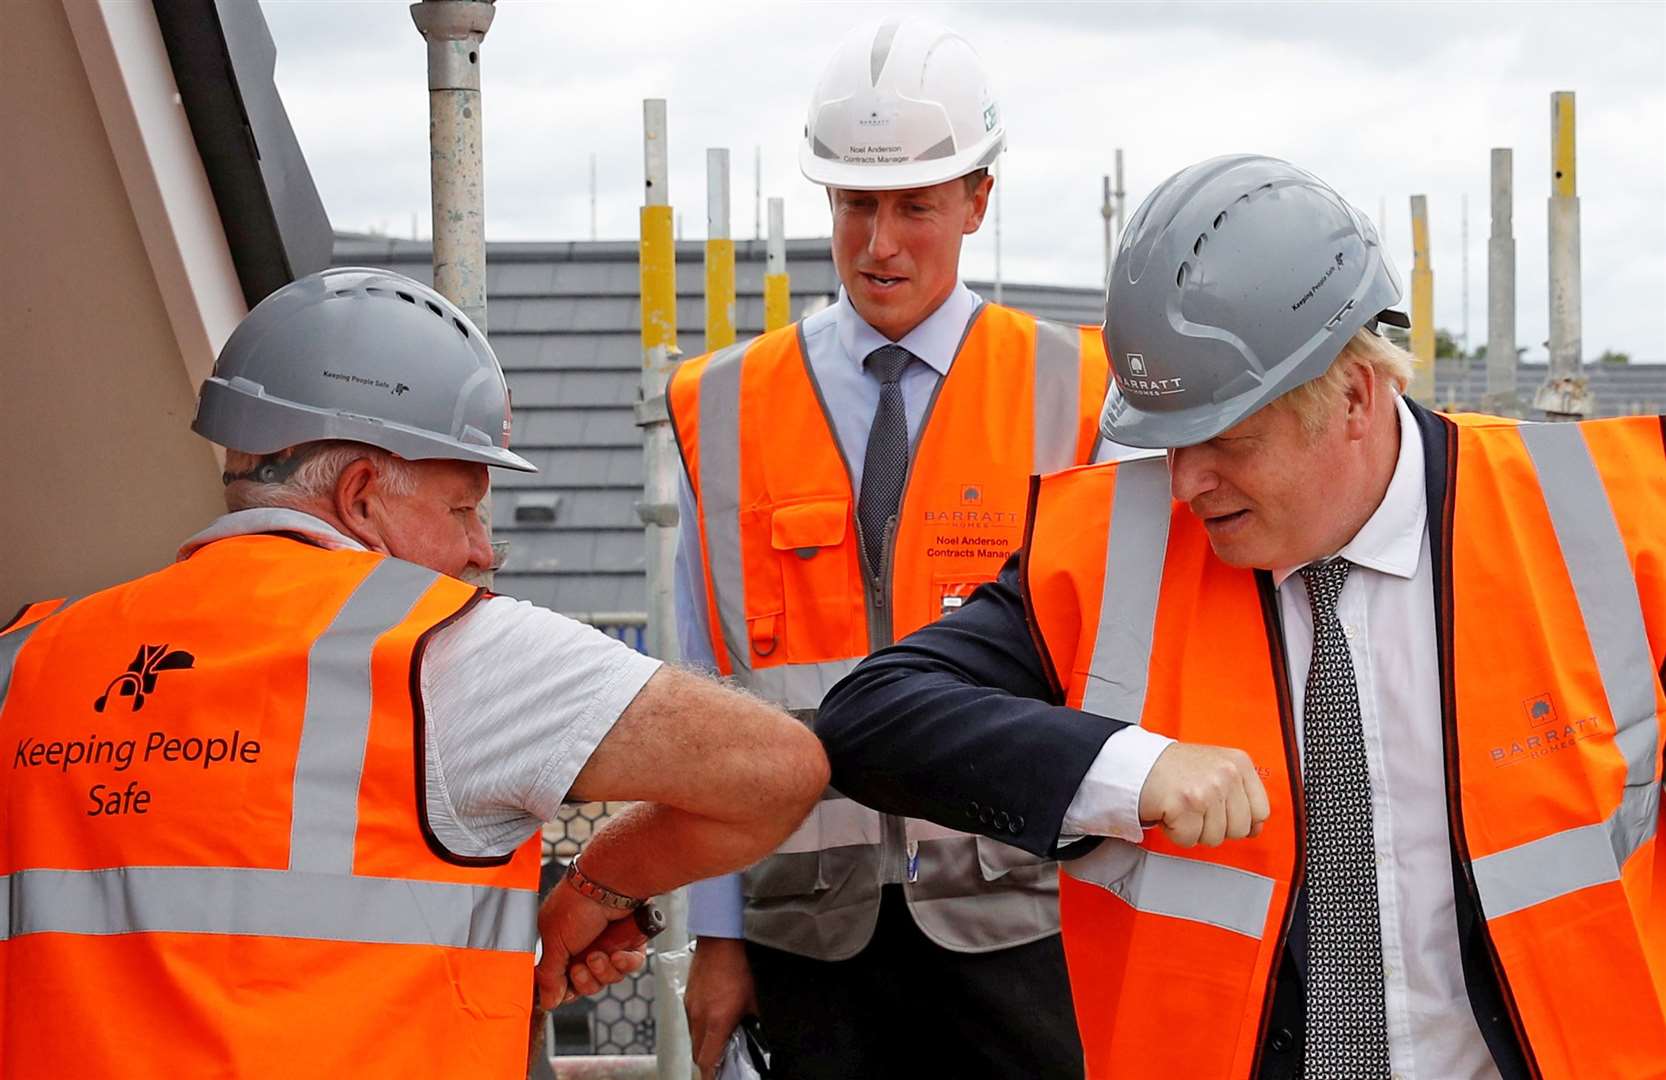 Elbow bump greetings, like the one between Boris Johnson and a construction worker in Cheshire, may continue if people want to avoid shaking hands (Phil Noble/PA)